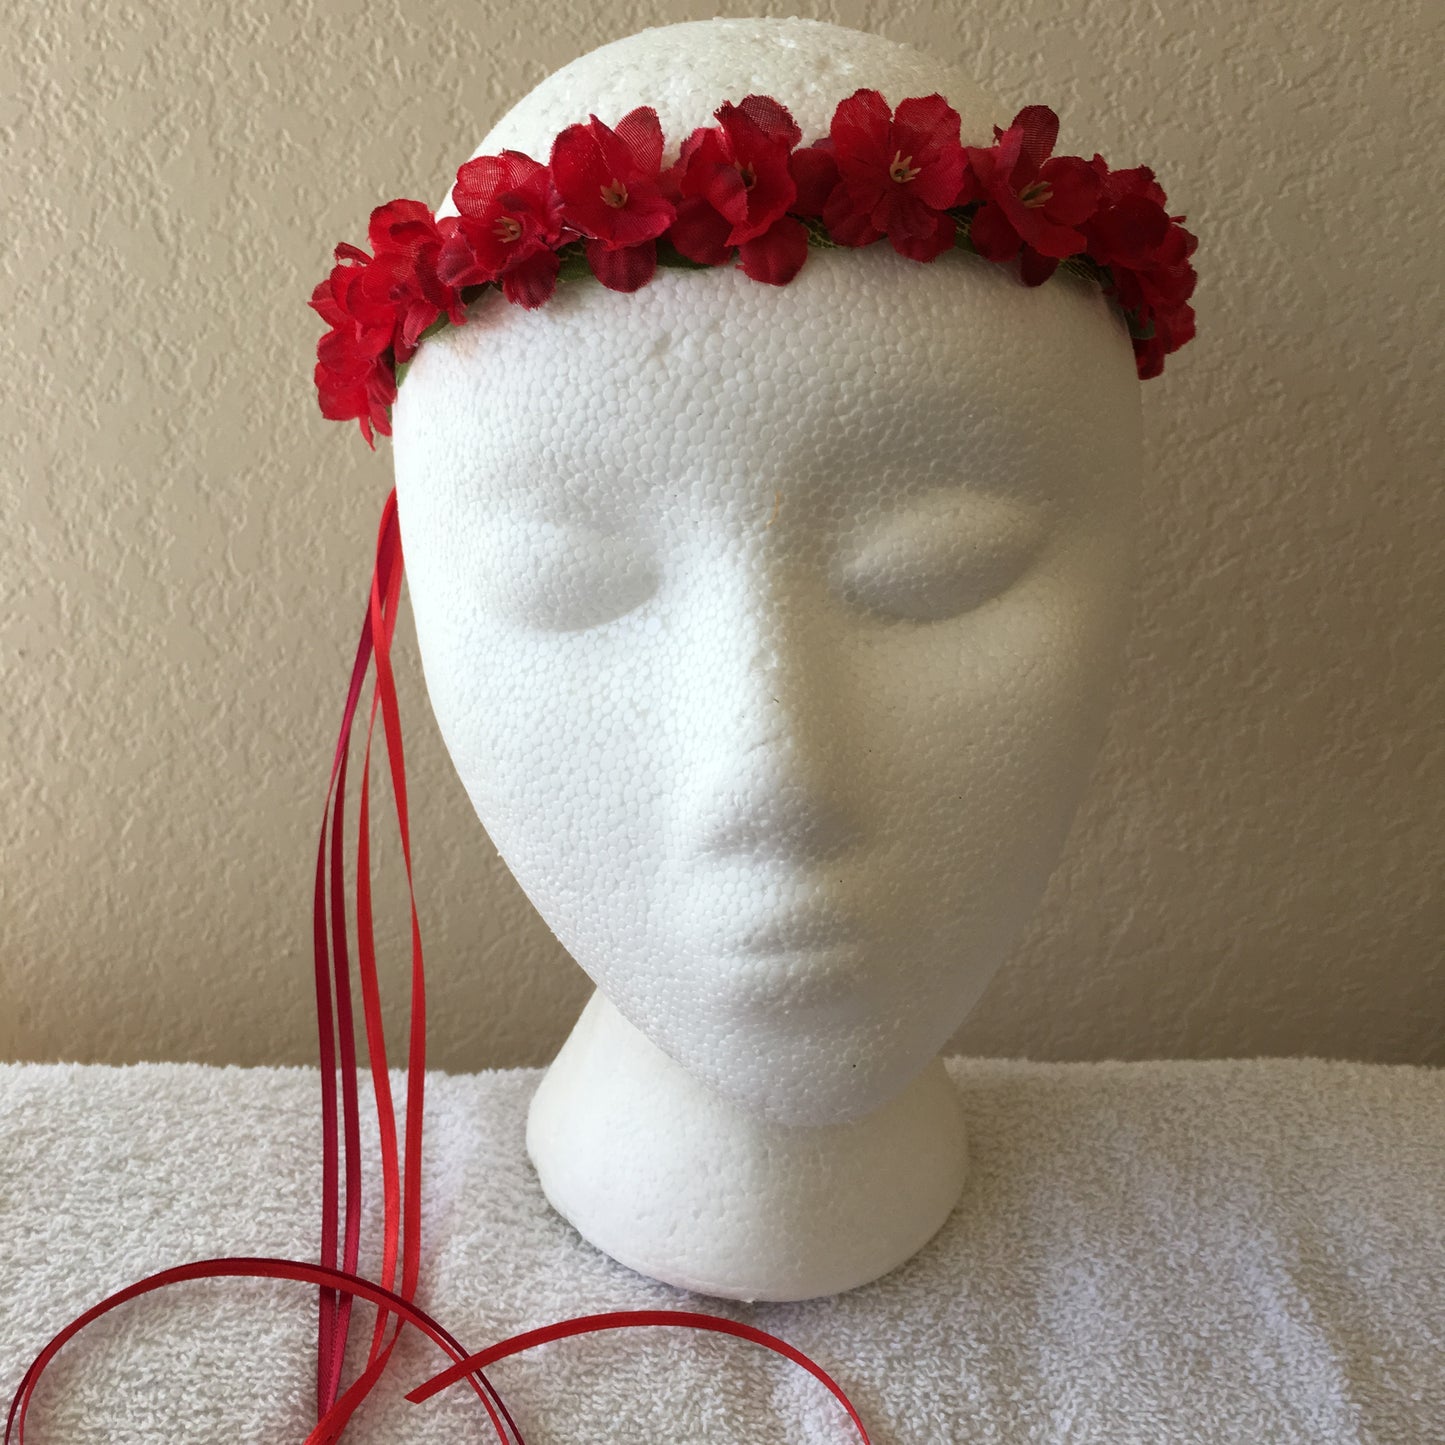 Extra Small Wreath - All red flowers